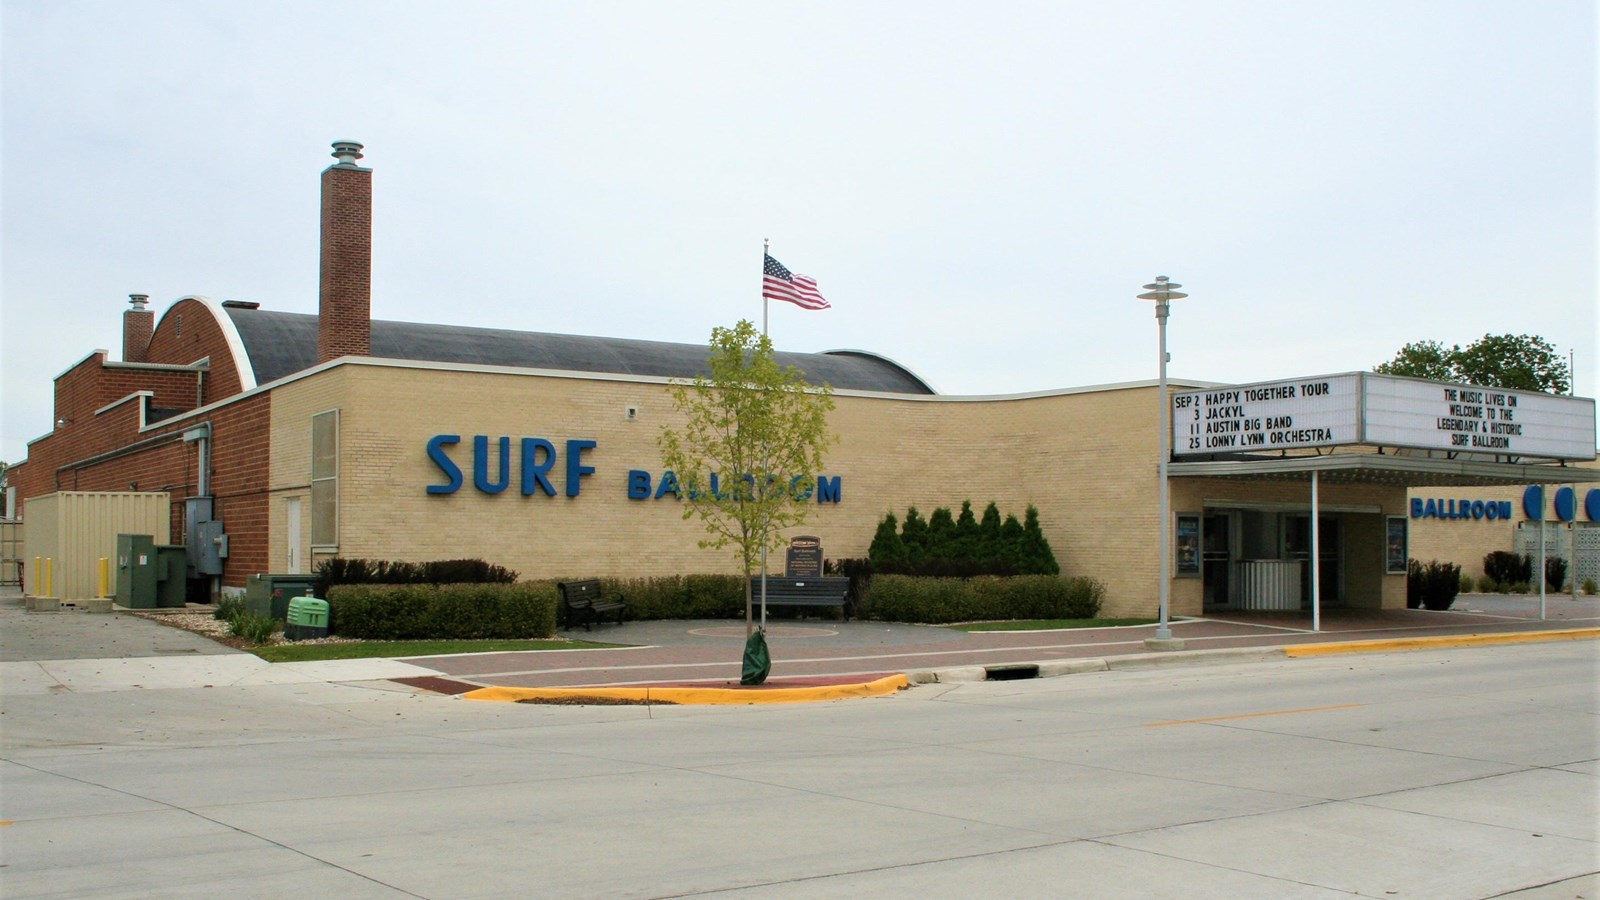 A wide, one-story building with a sign reading Surf Ballroom sits on a street corner.